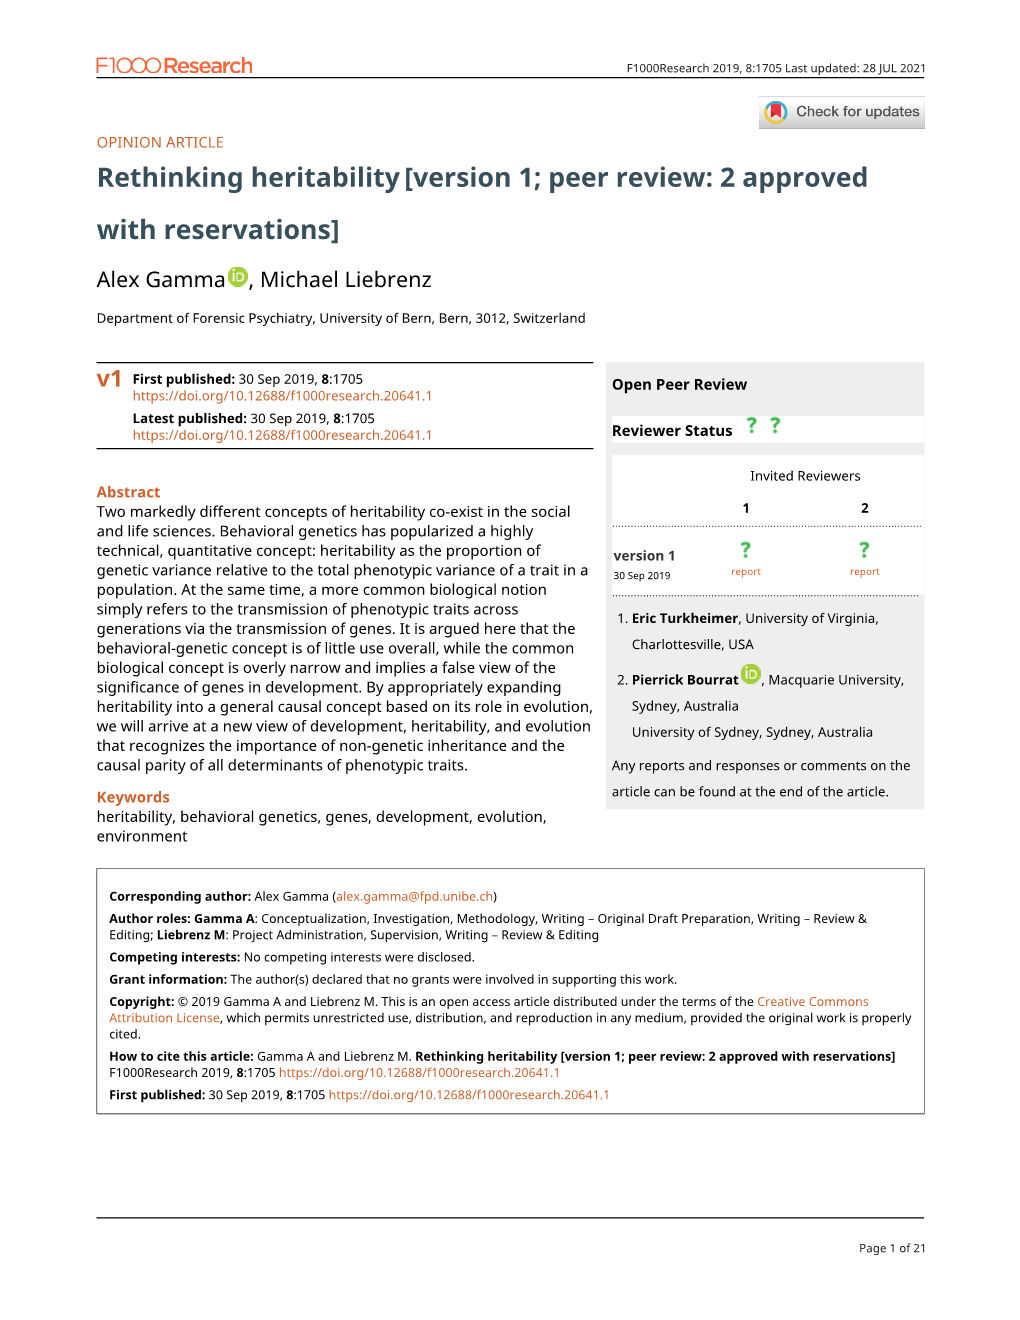 Rethinking Heritability[Version 1; Peer Review: 2 Approved with Reservations]